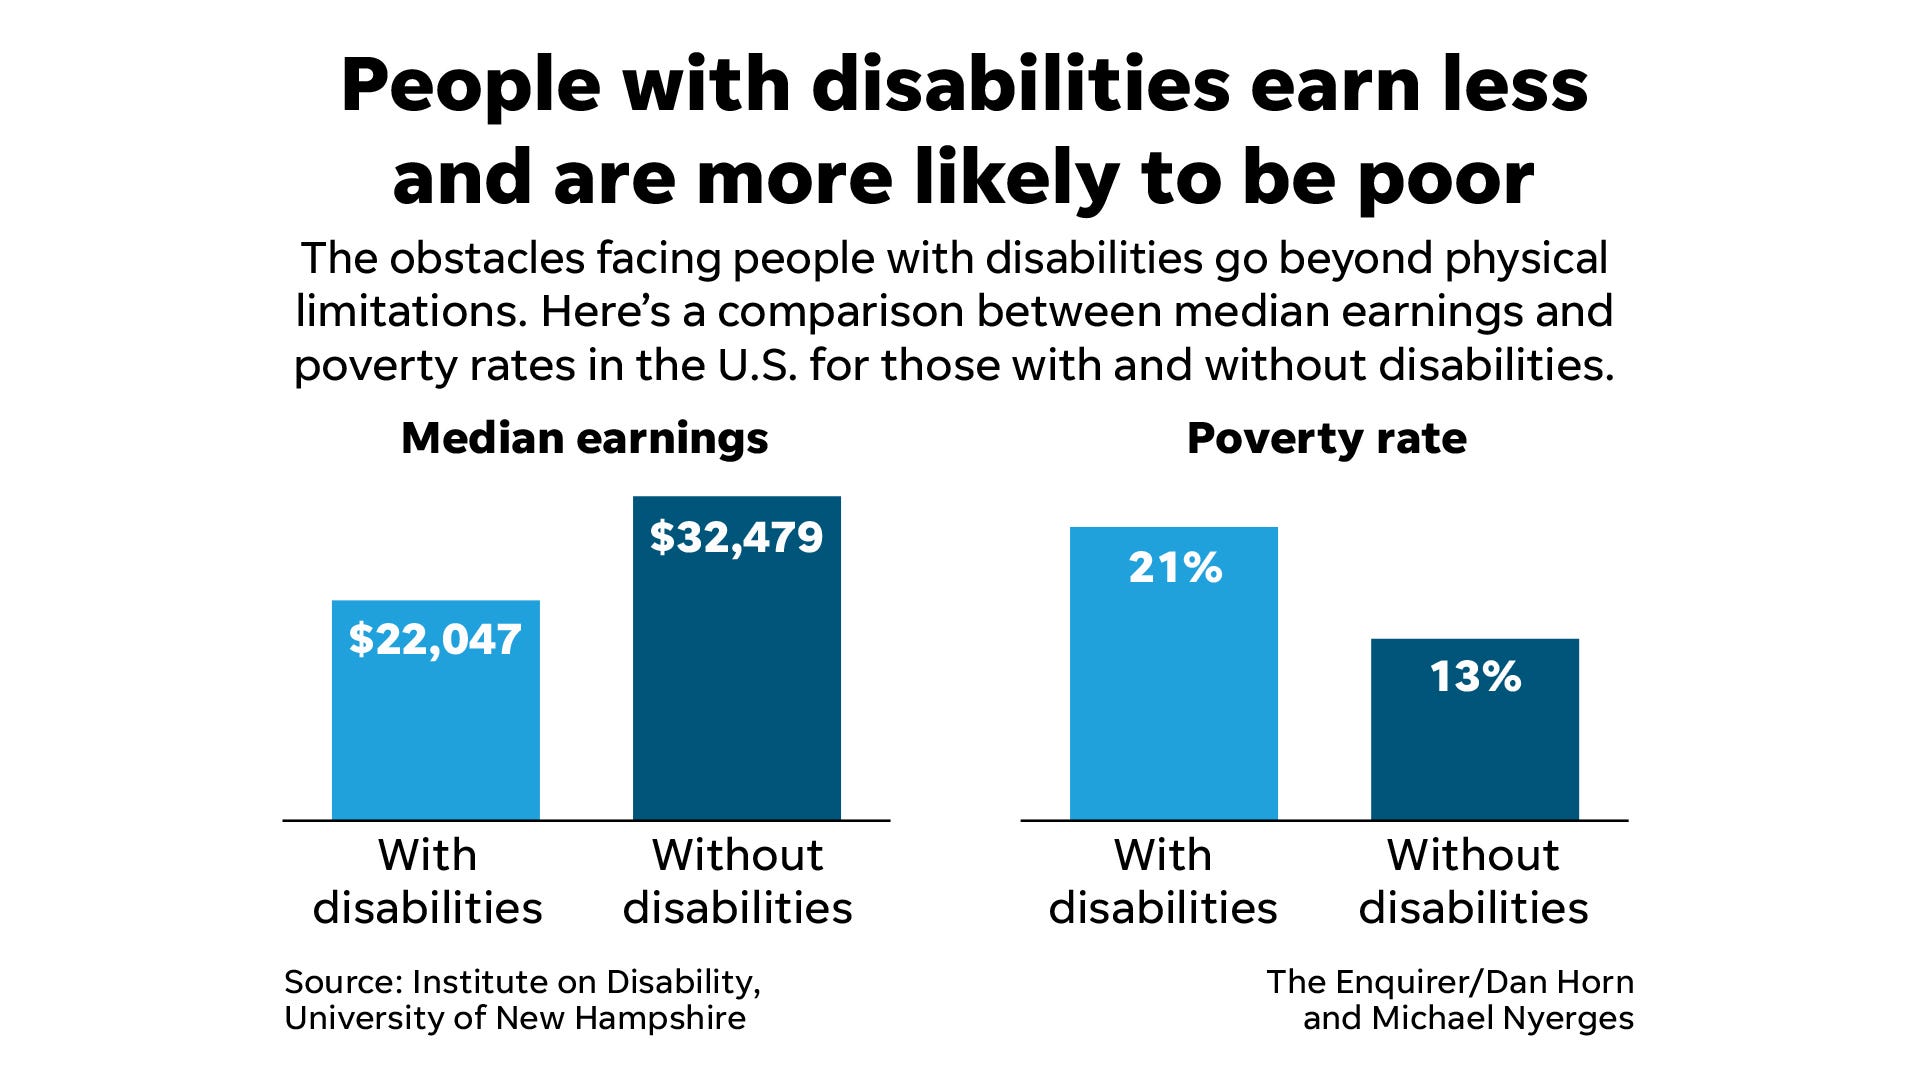 People with disabilities earn less and are more likely to be poor